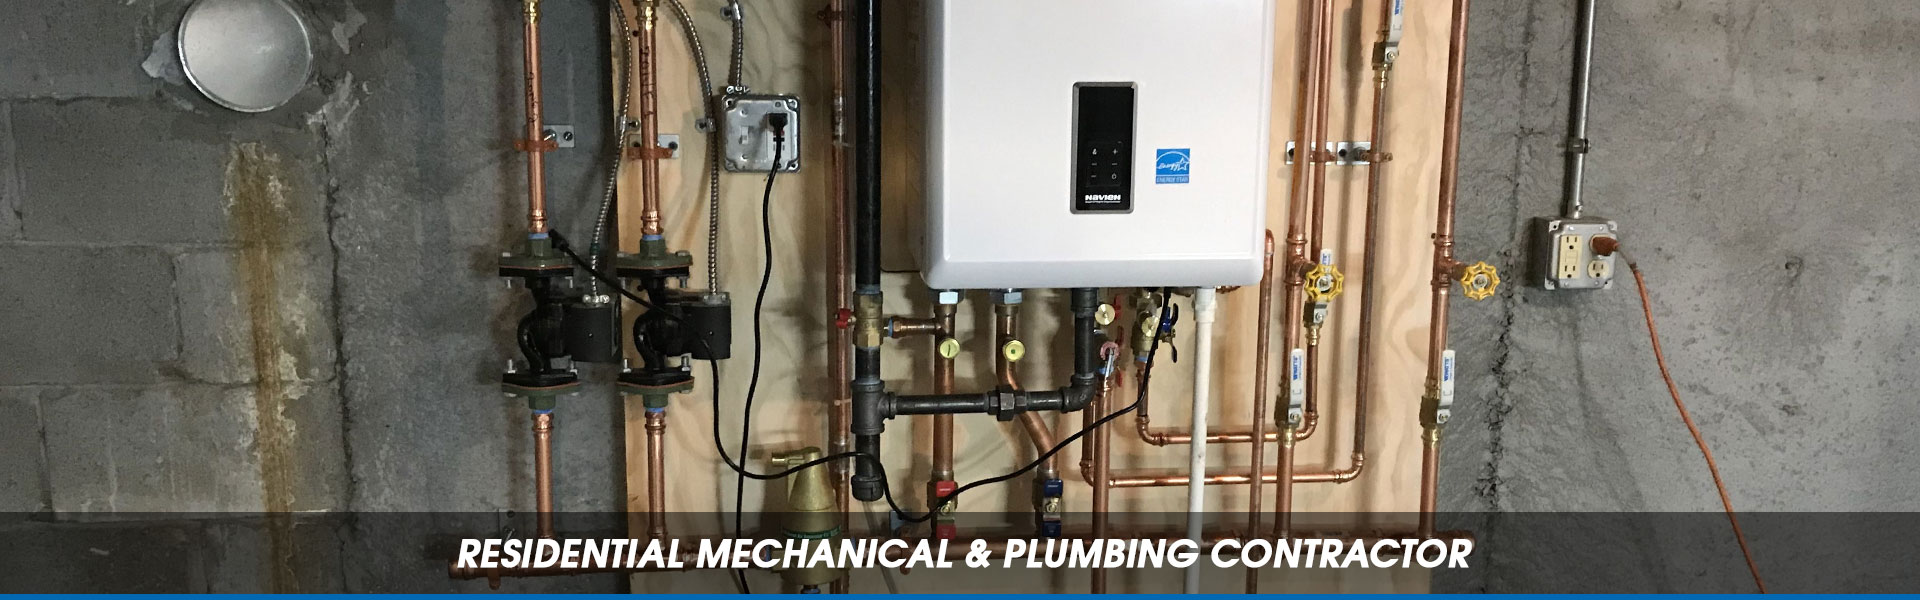 residential mechanical plumbing contractor, tankless water heater, copper pipes